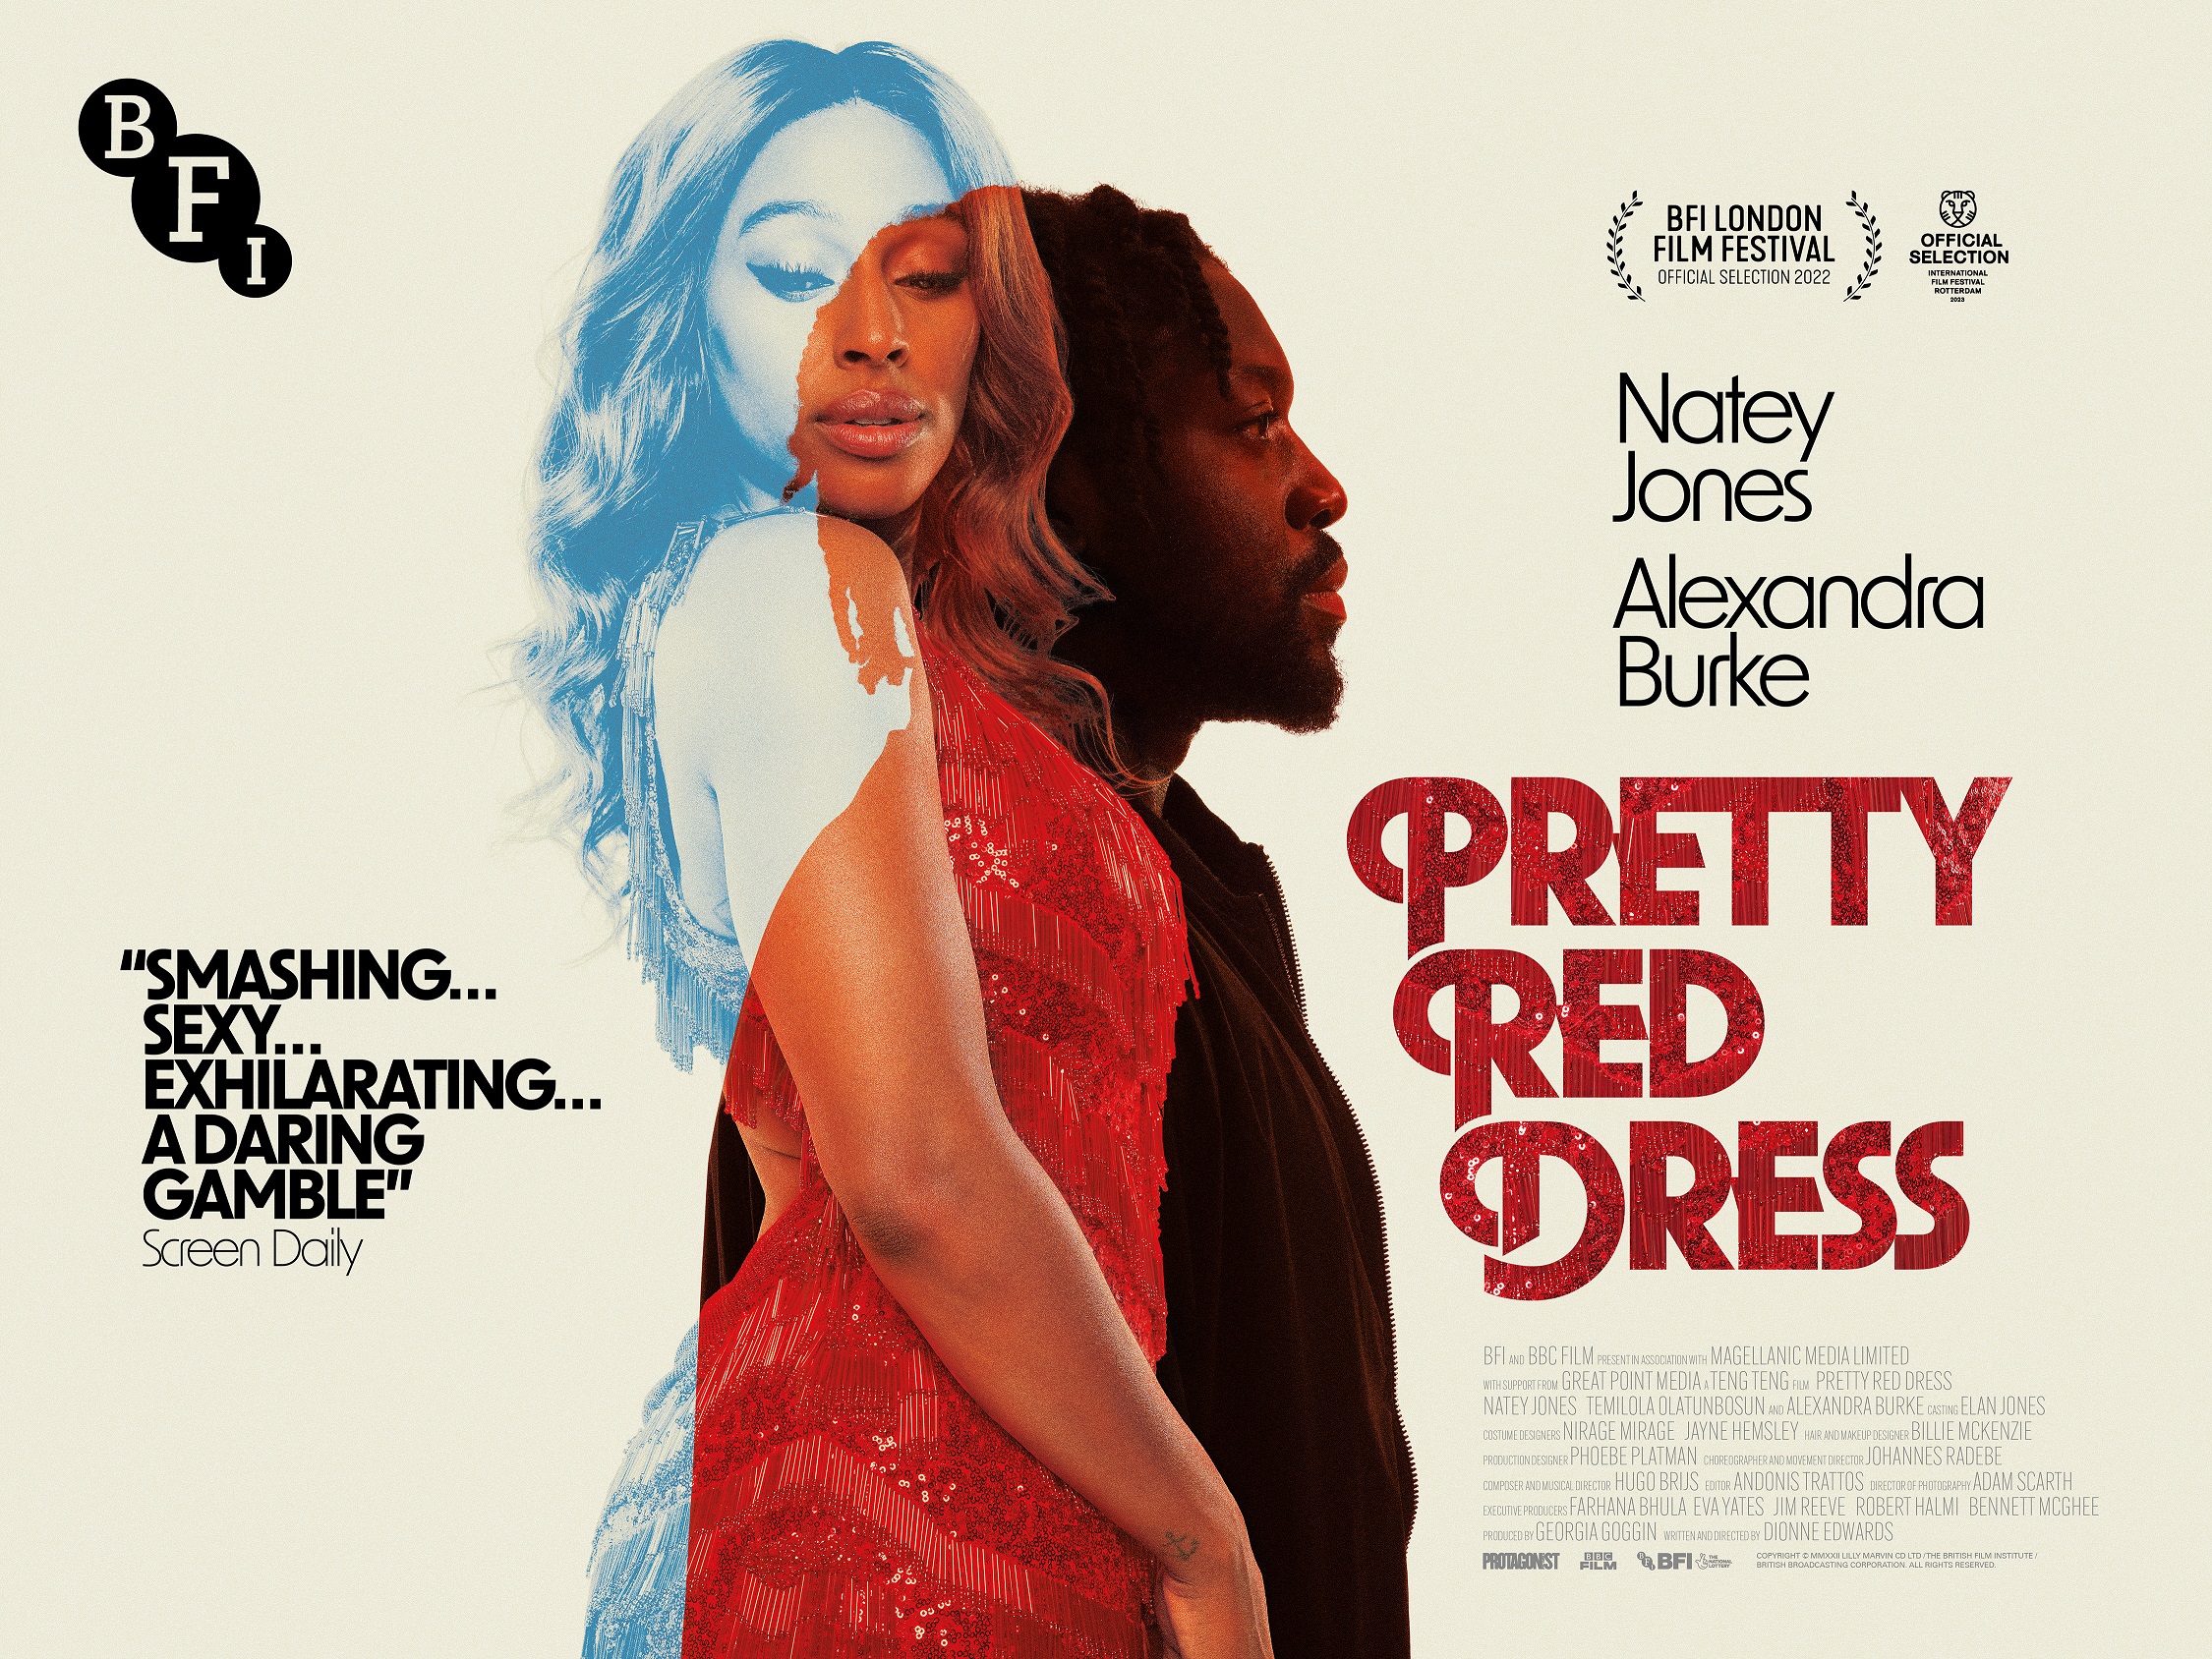 PRETTY RED DRESS is the debut feature by Dionne Edwards exploring family life after prison